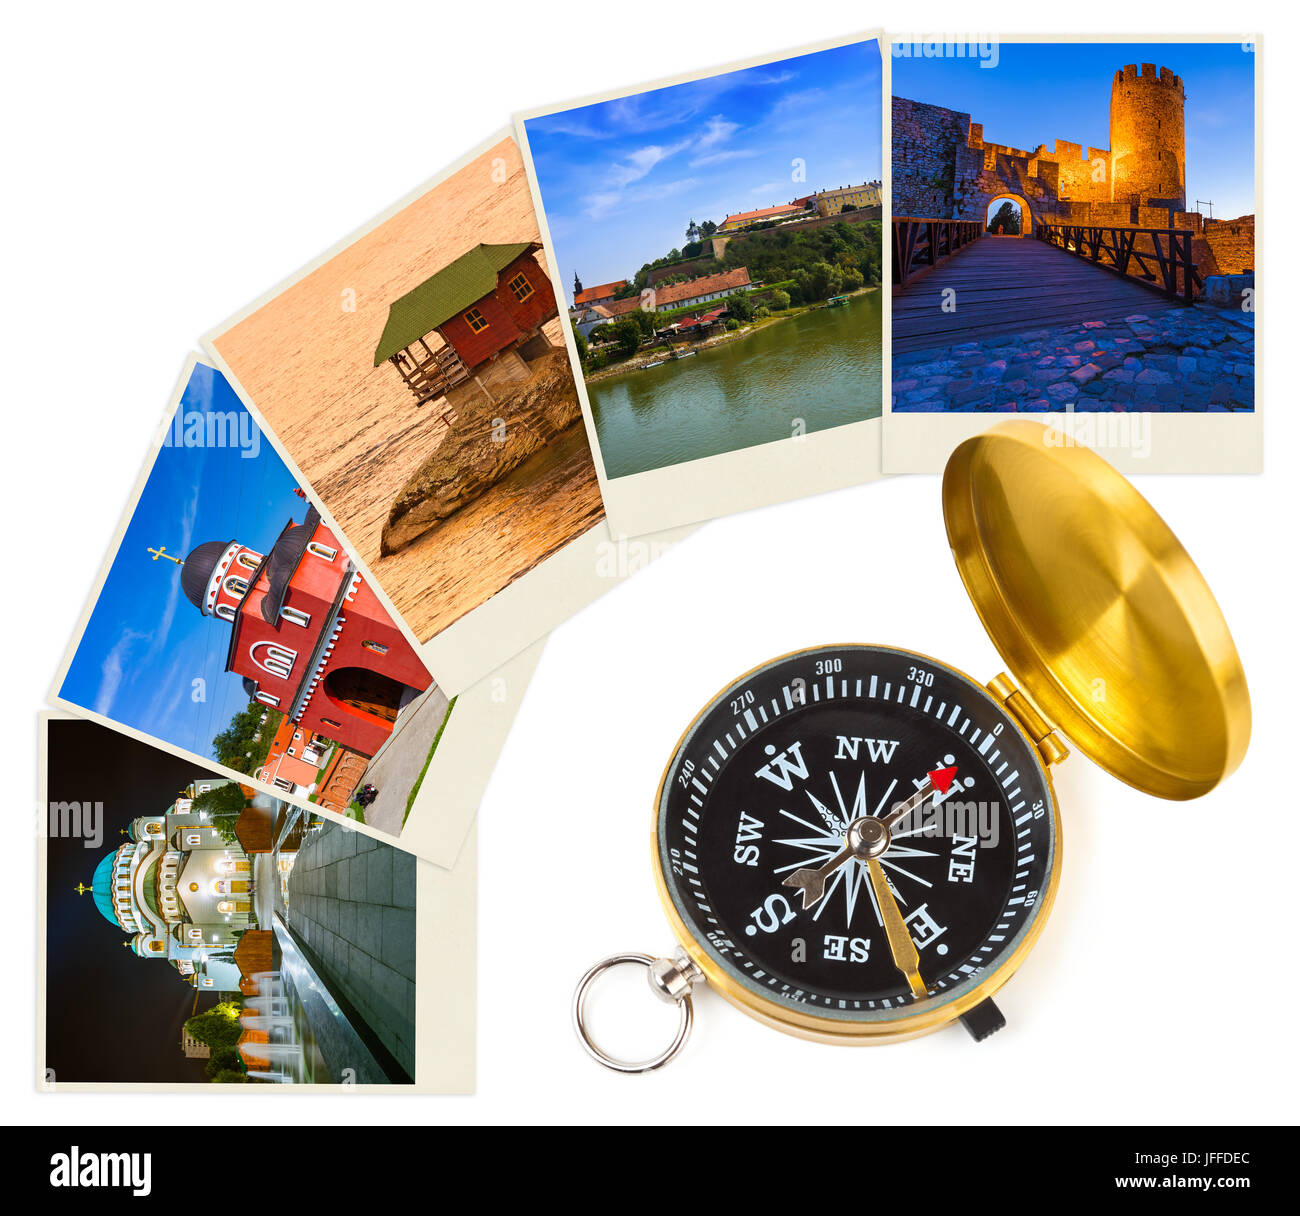 Serbia travel images (my photos) and compass Stock Photo